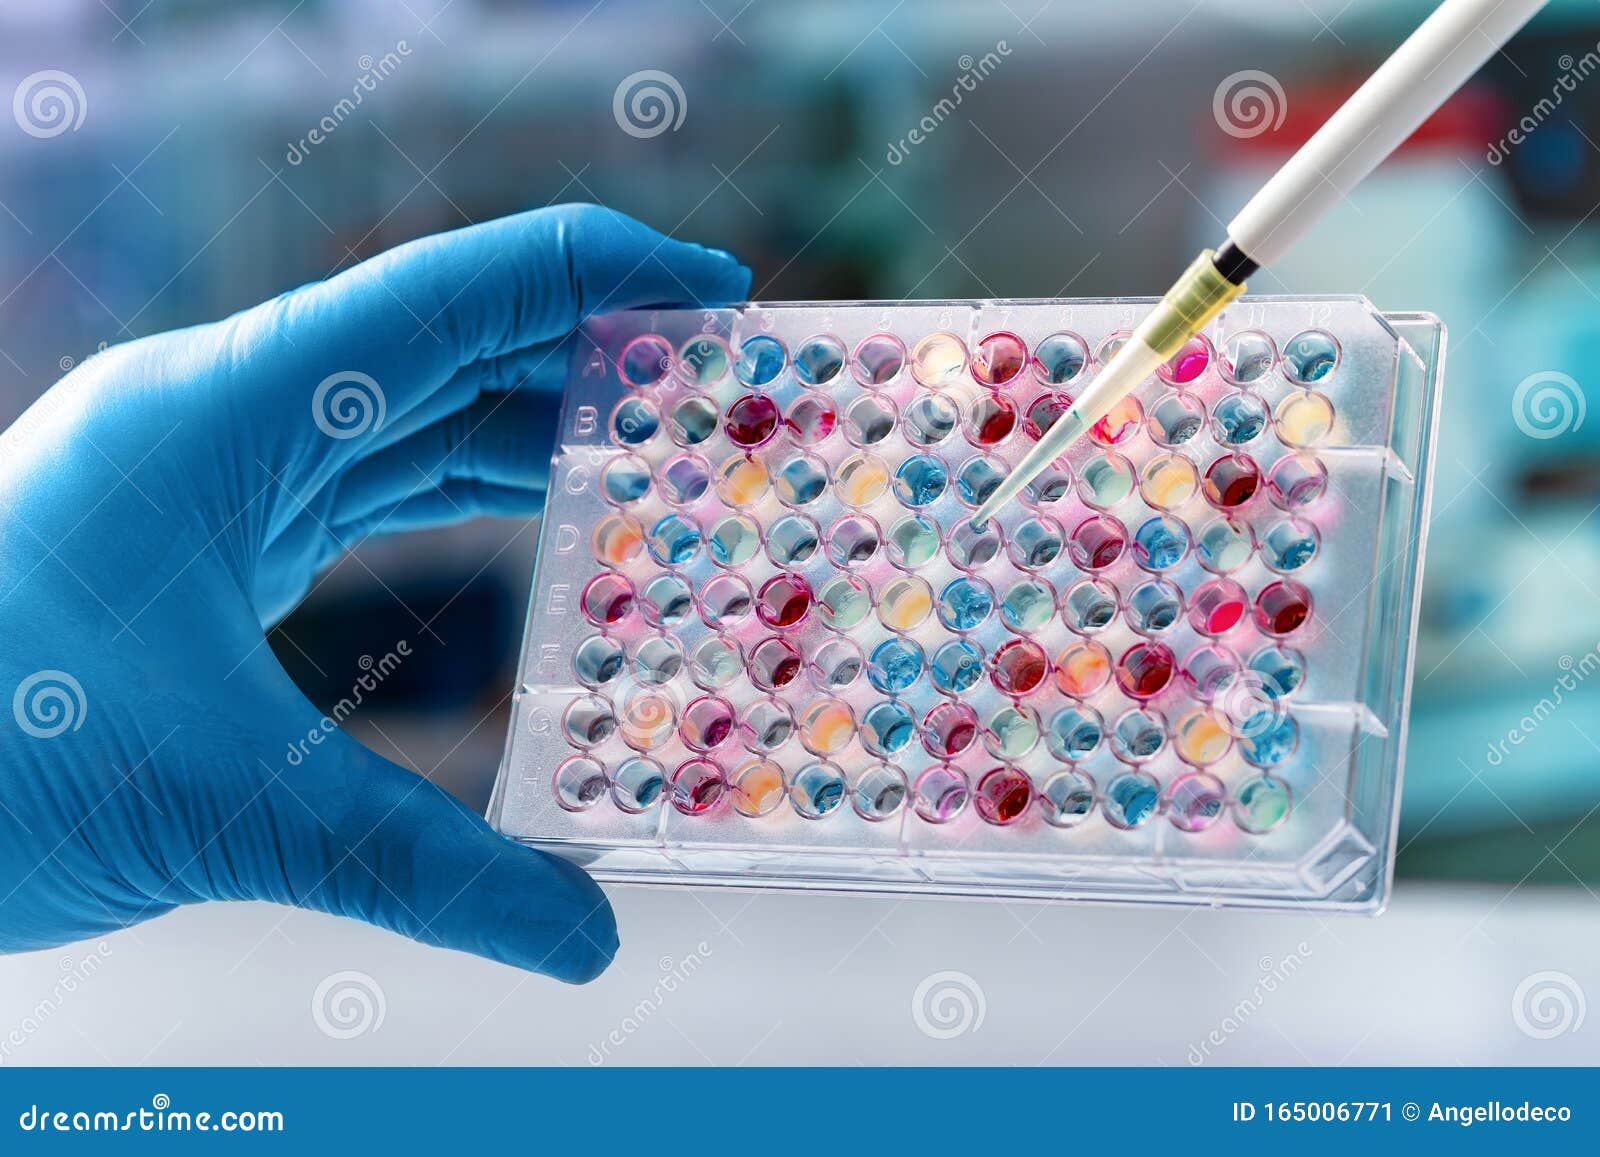 scientist hand holding microplate for biomedical research